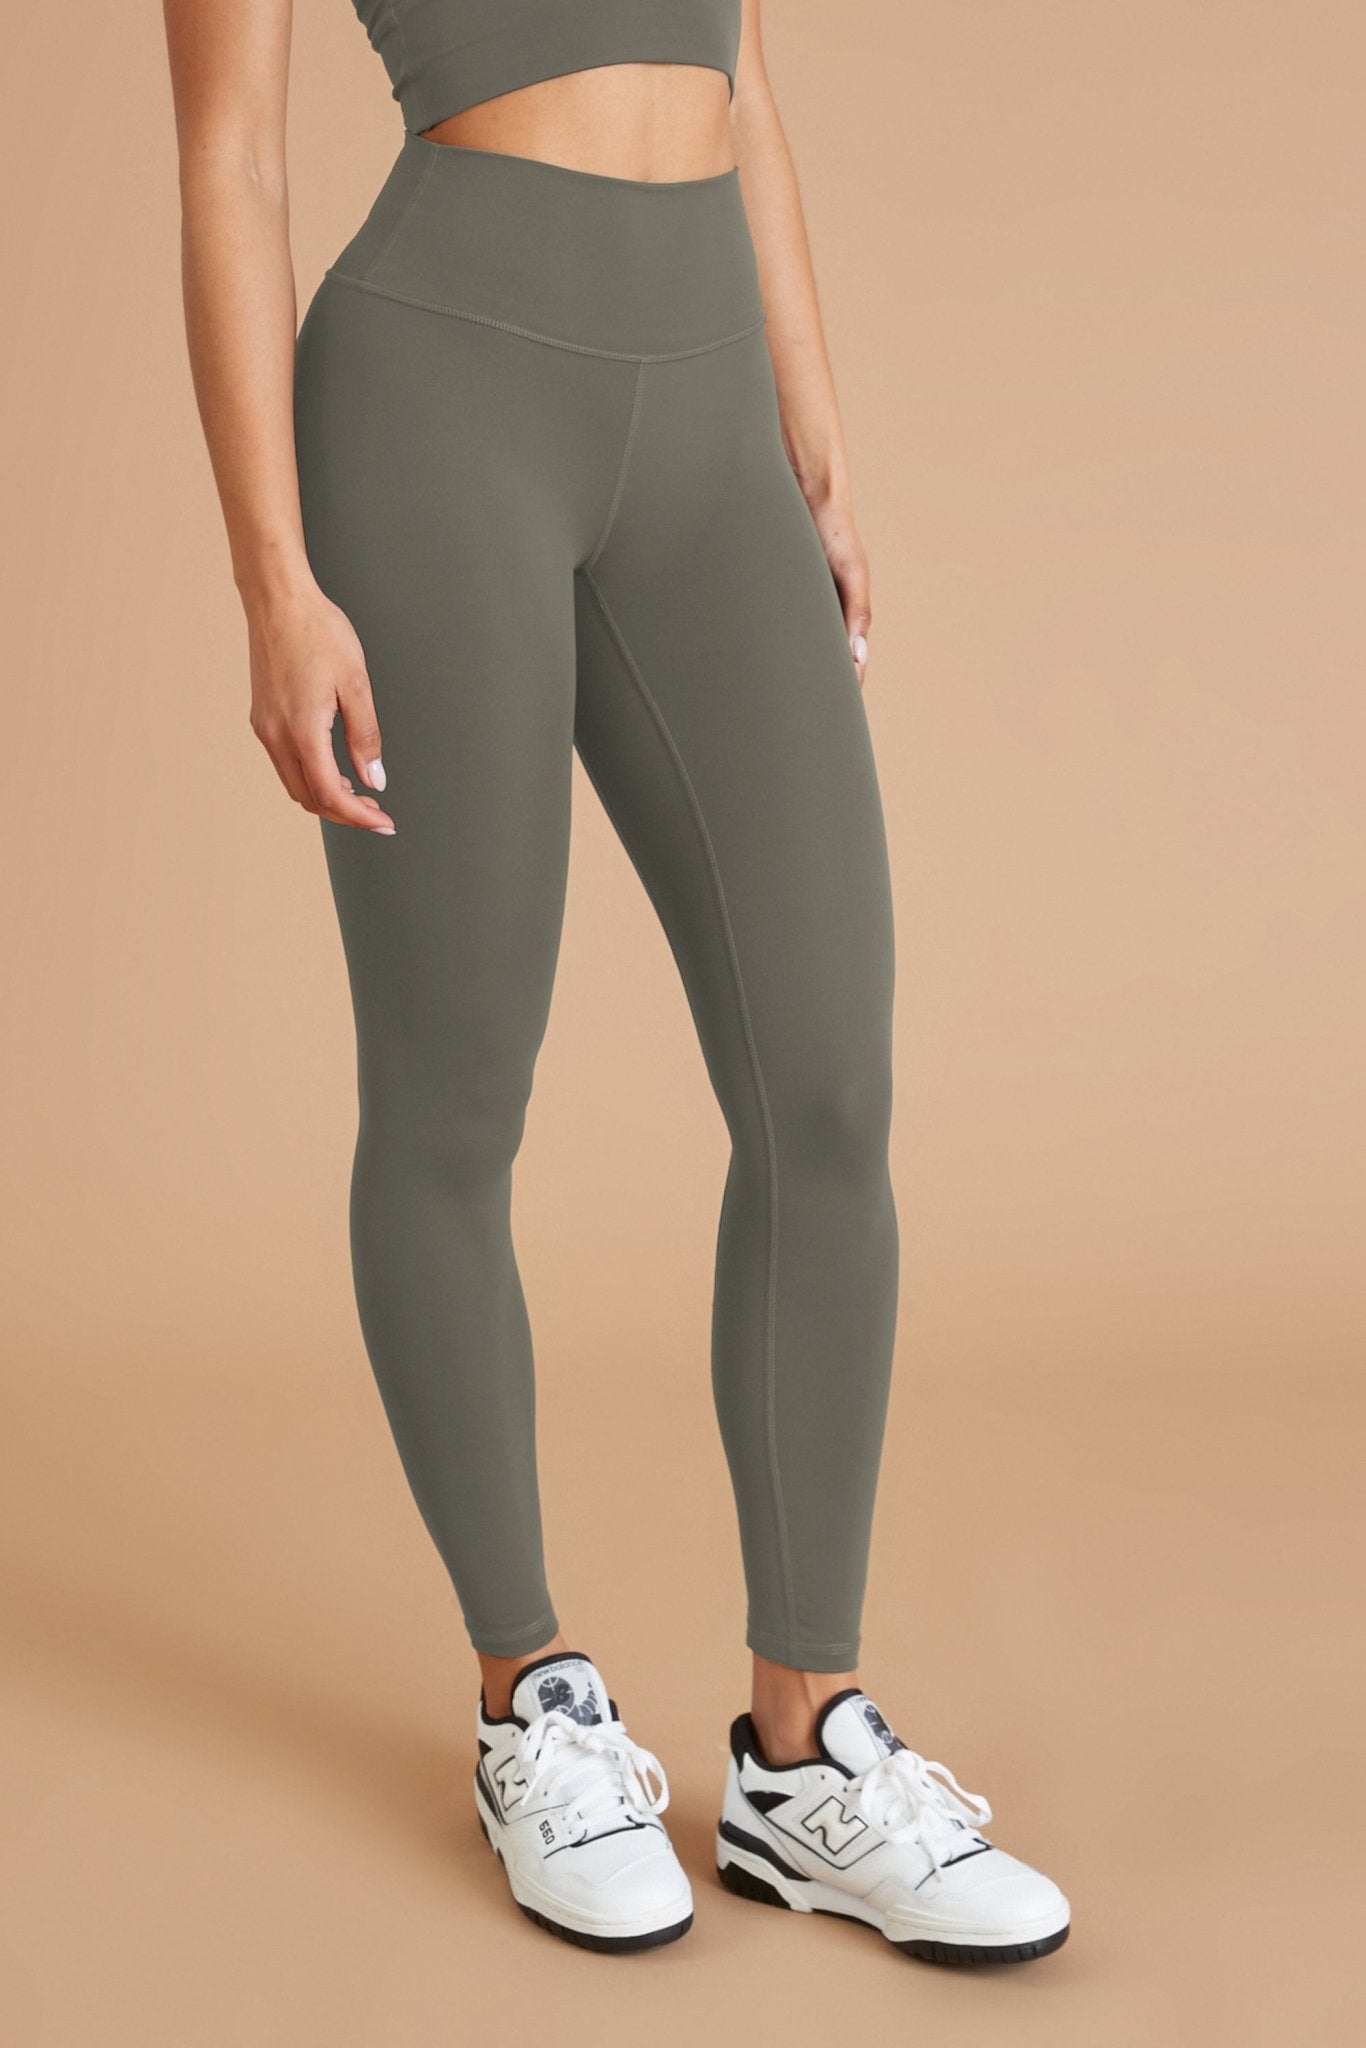 Women's Yoga Wear Collection